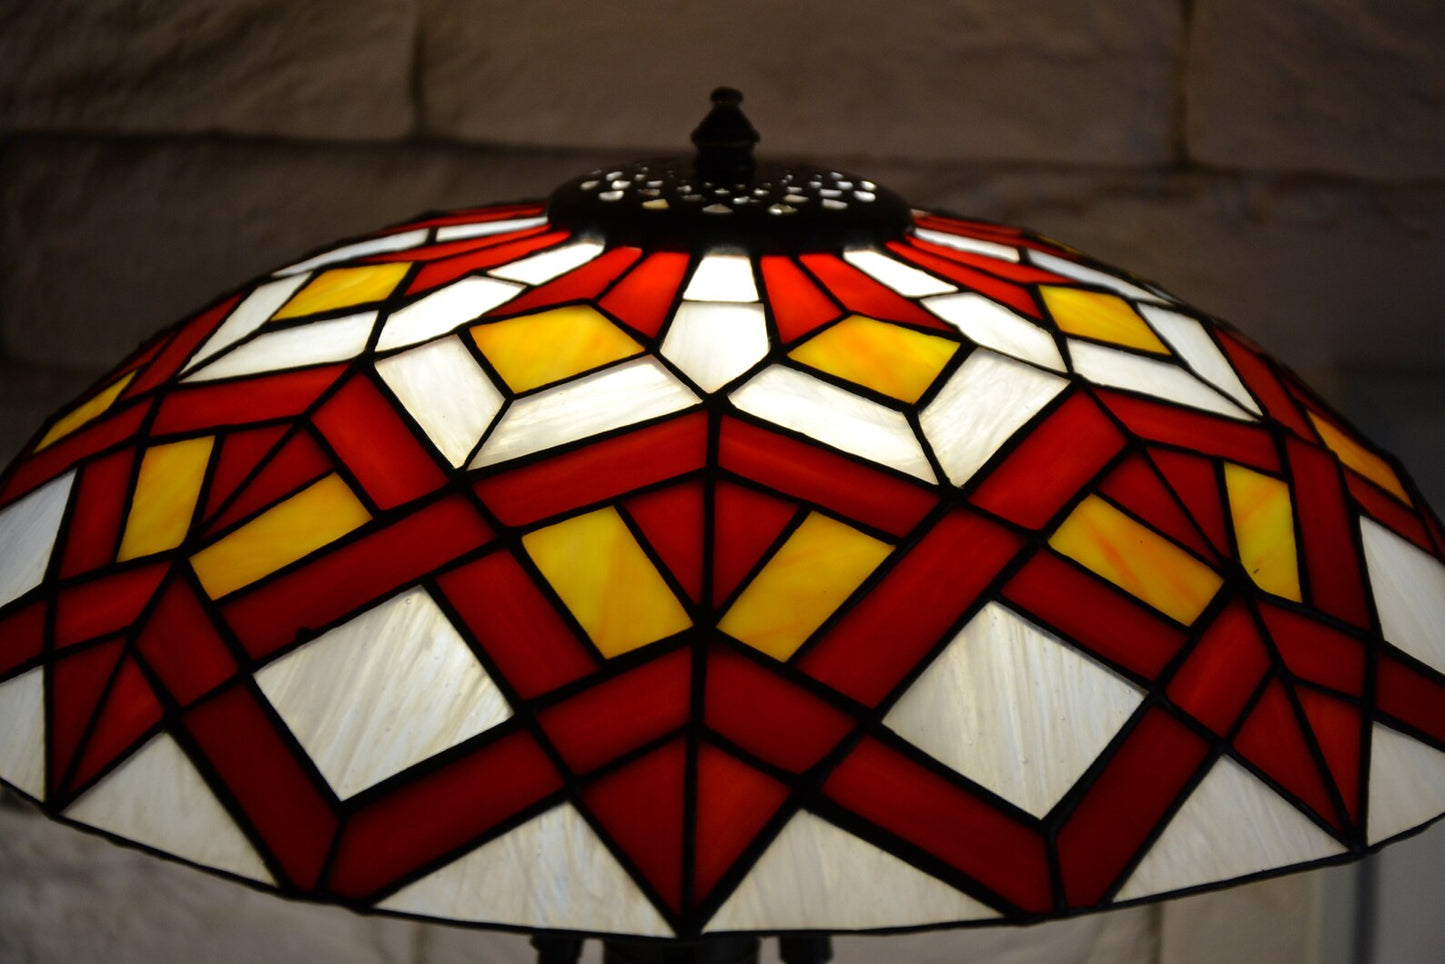 Tiffany lamp Stained glass lamp Geometric pattern Red table lamp Desk lamp Bronze base Mother's day gift